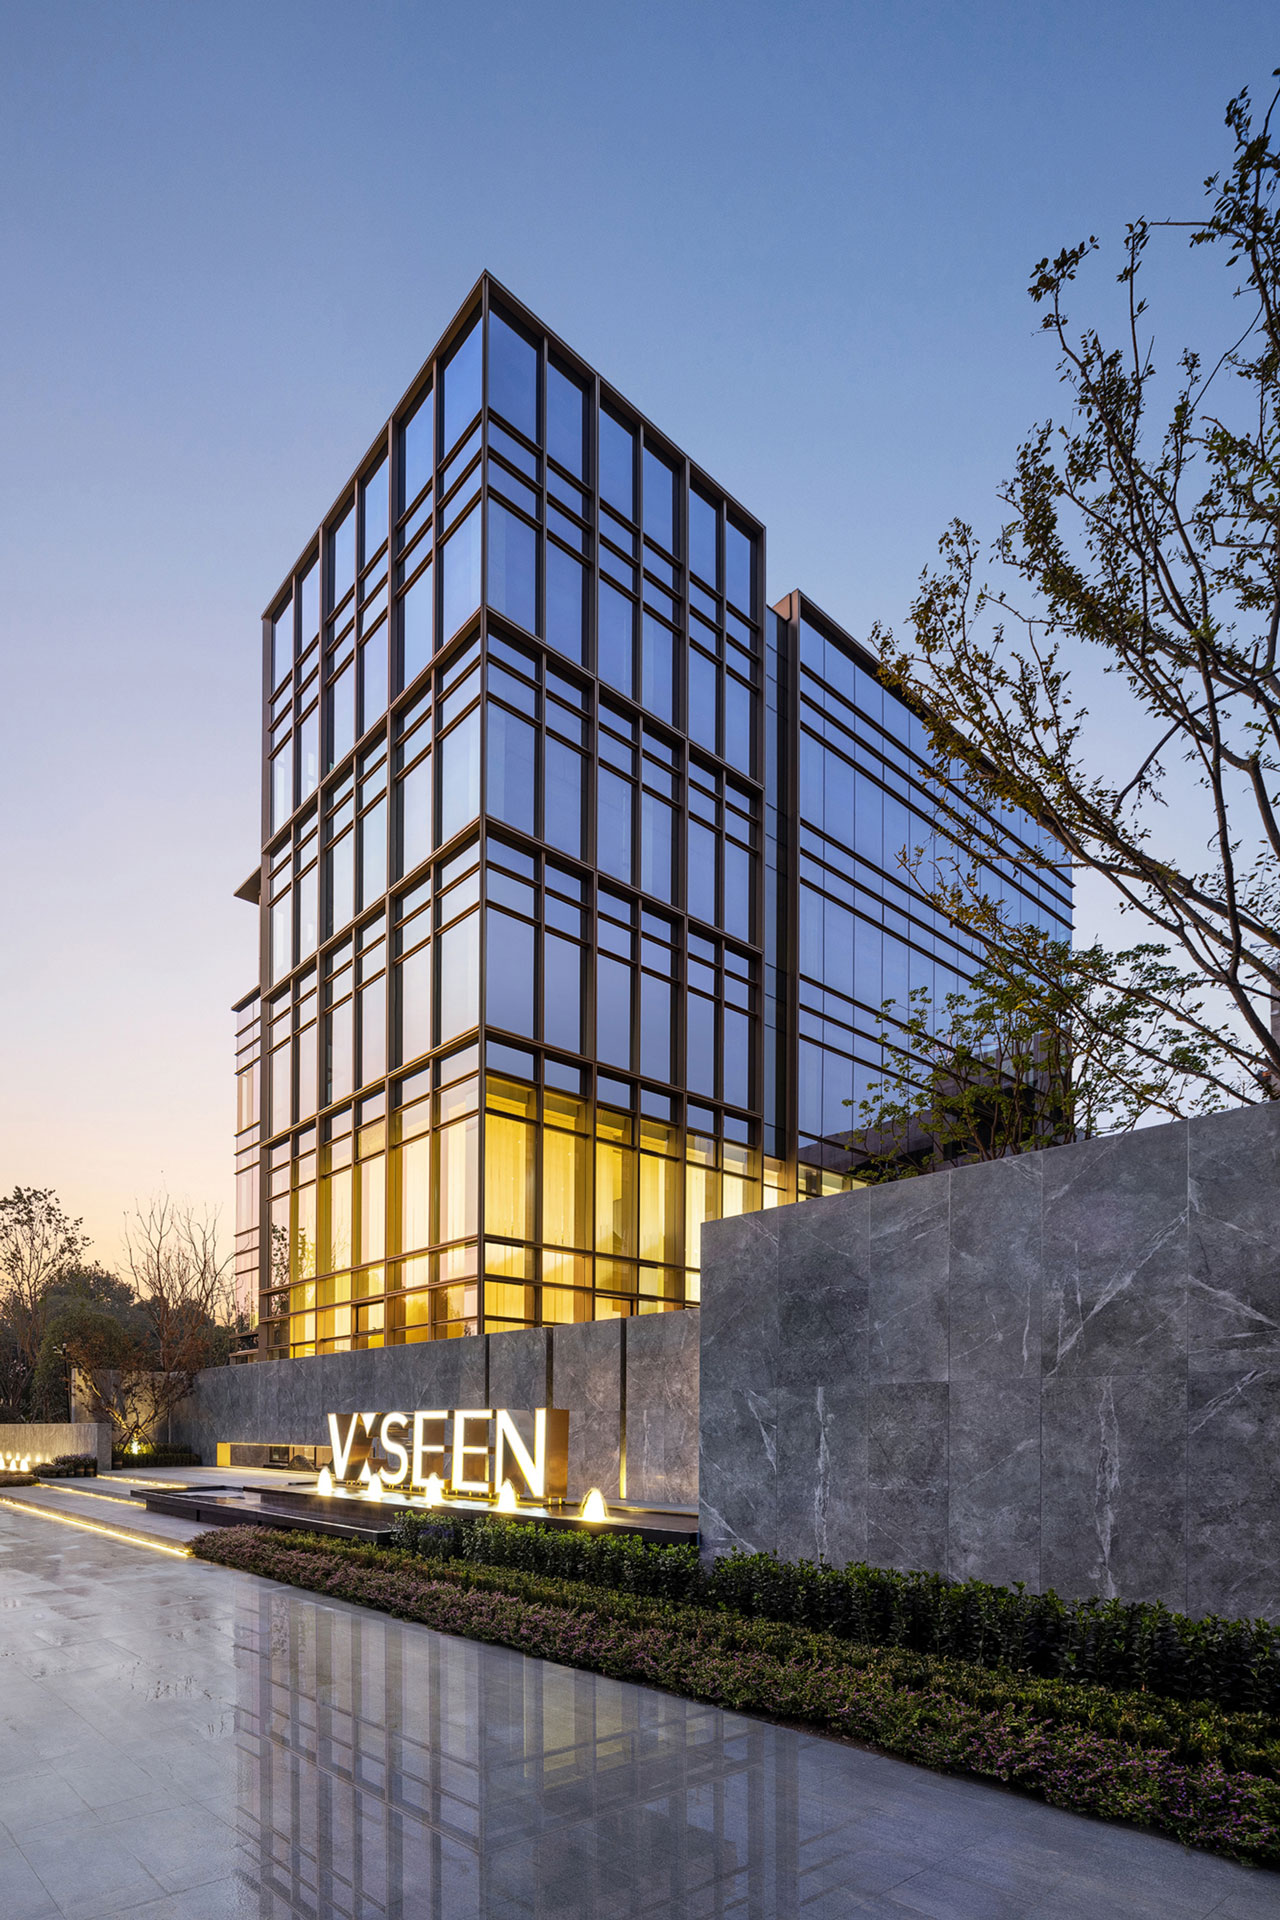 TITAN Property Awards - Hangzhou Gemdale Viseen Science and Technology Park